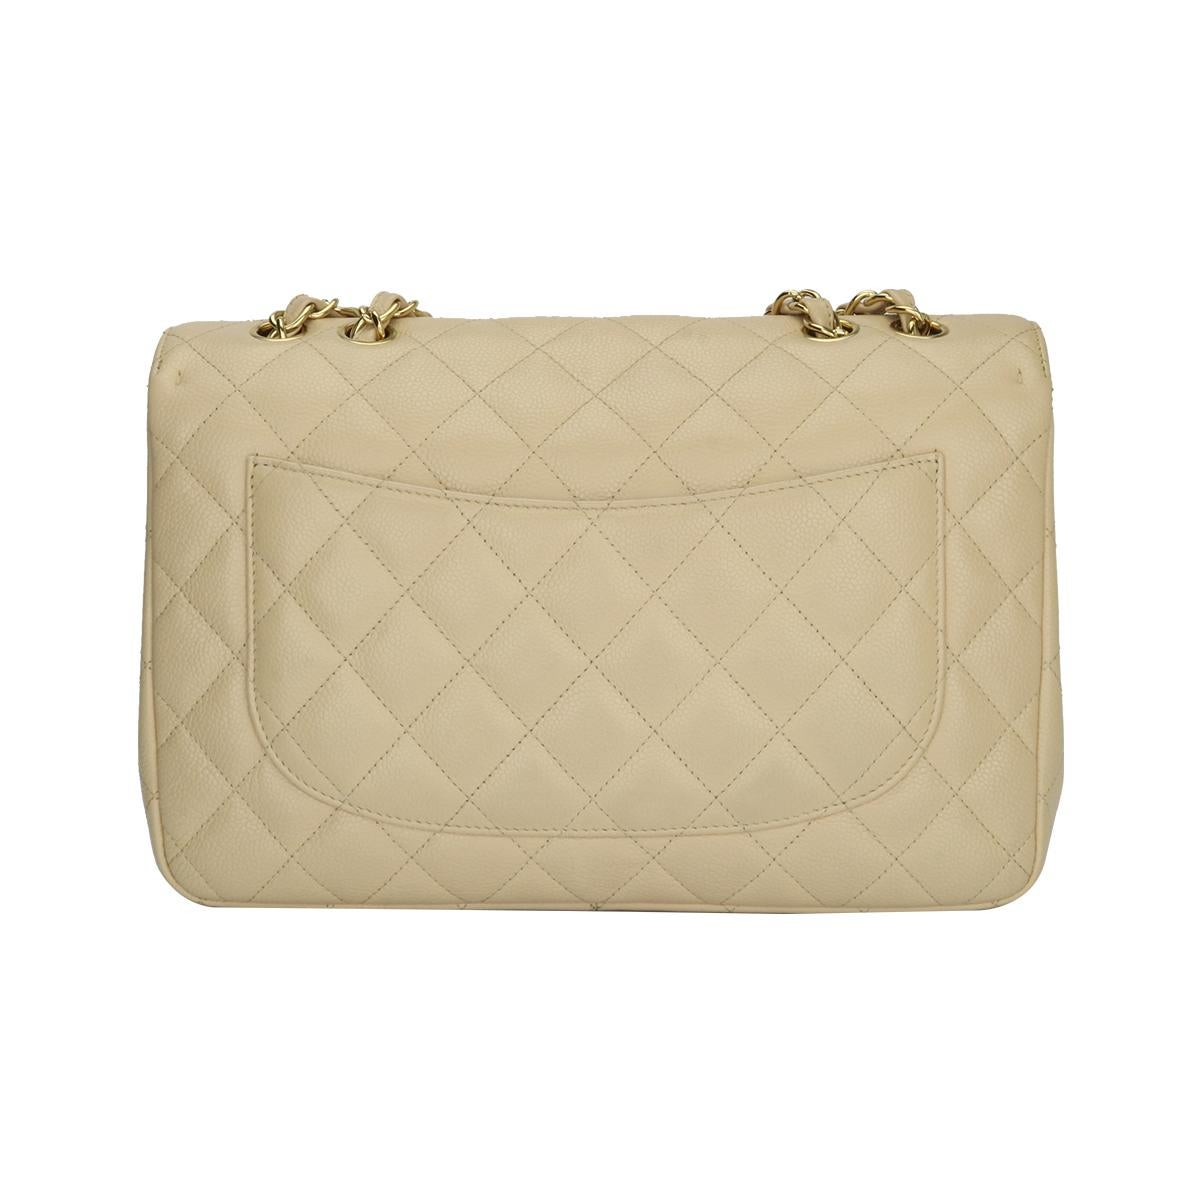 Women's or Men's CHANEL Classic Single Flap Jumbo Bag Beige Clair Caviar with Gold Hardware 2009